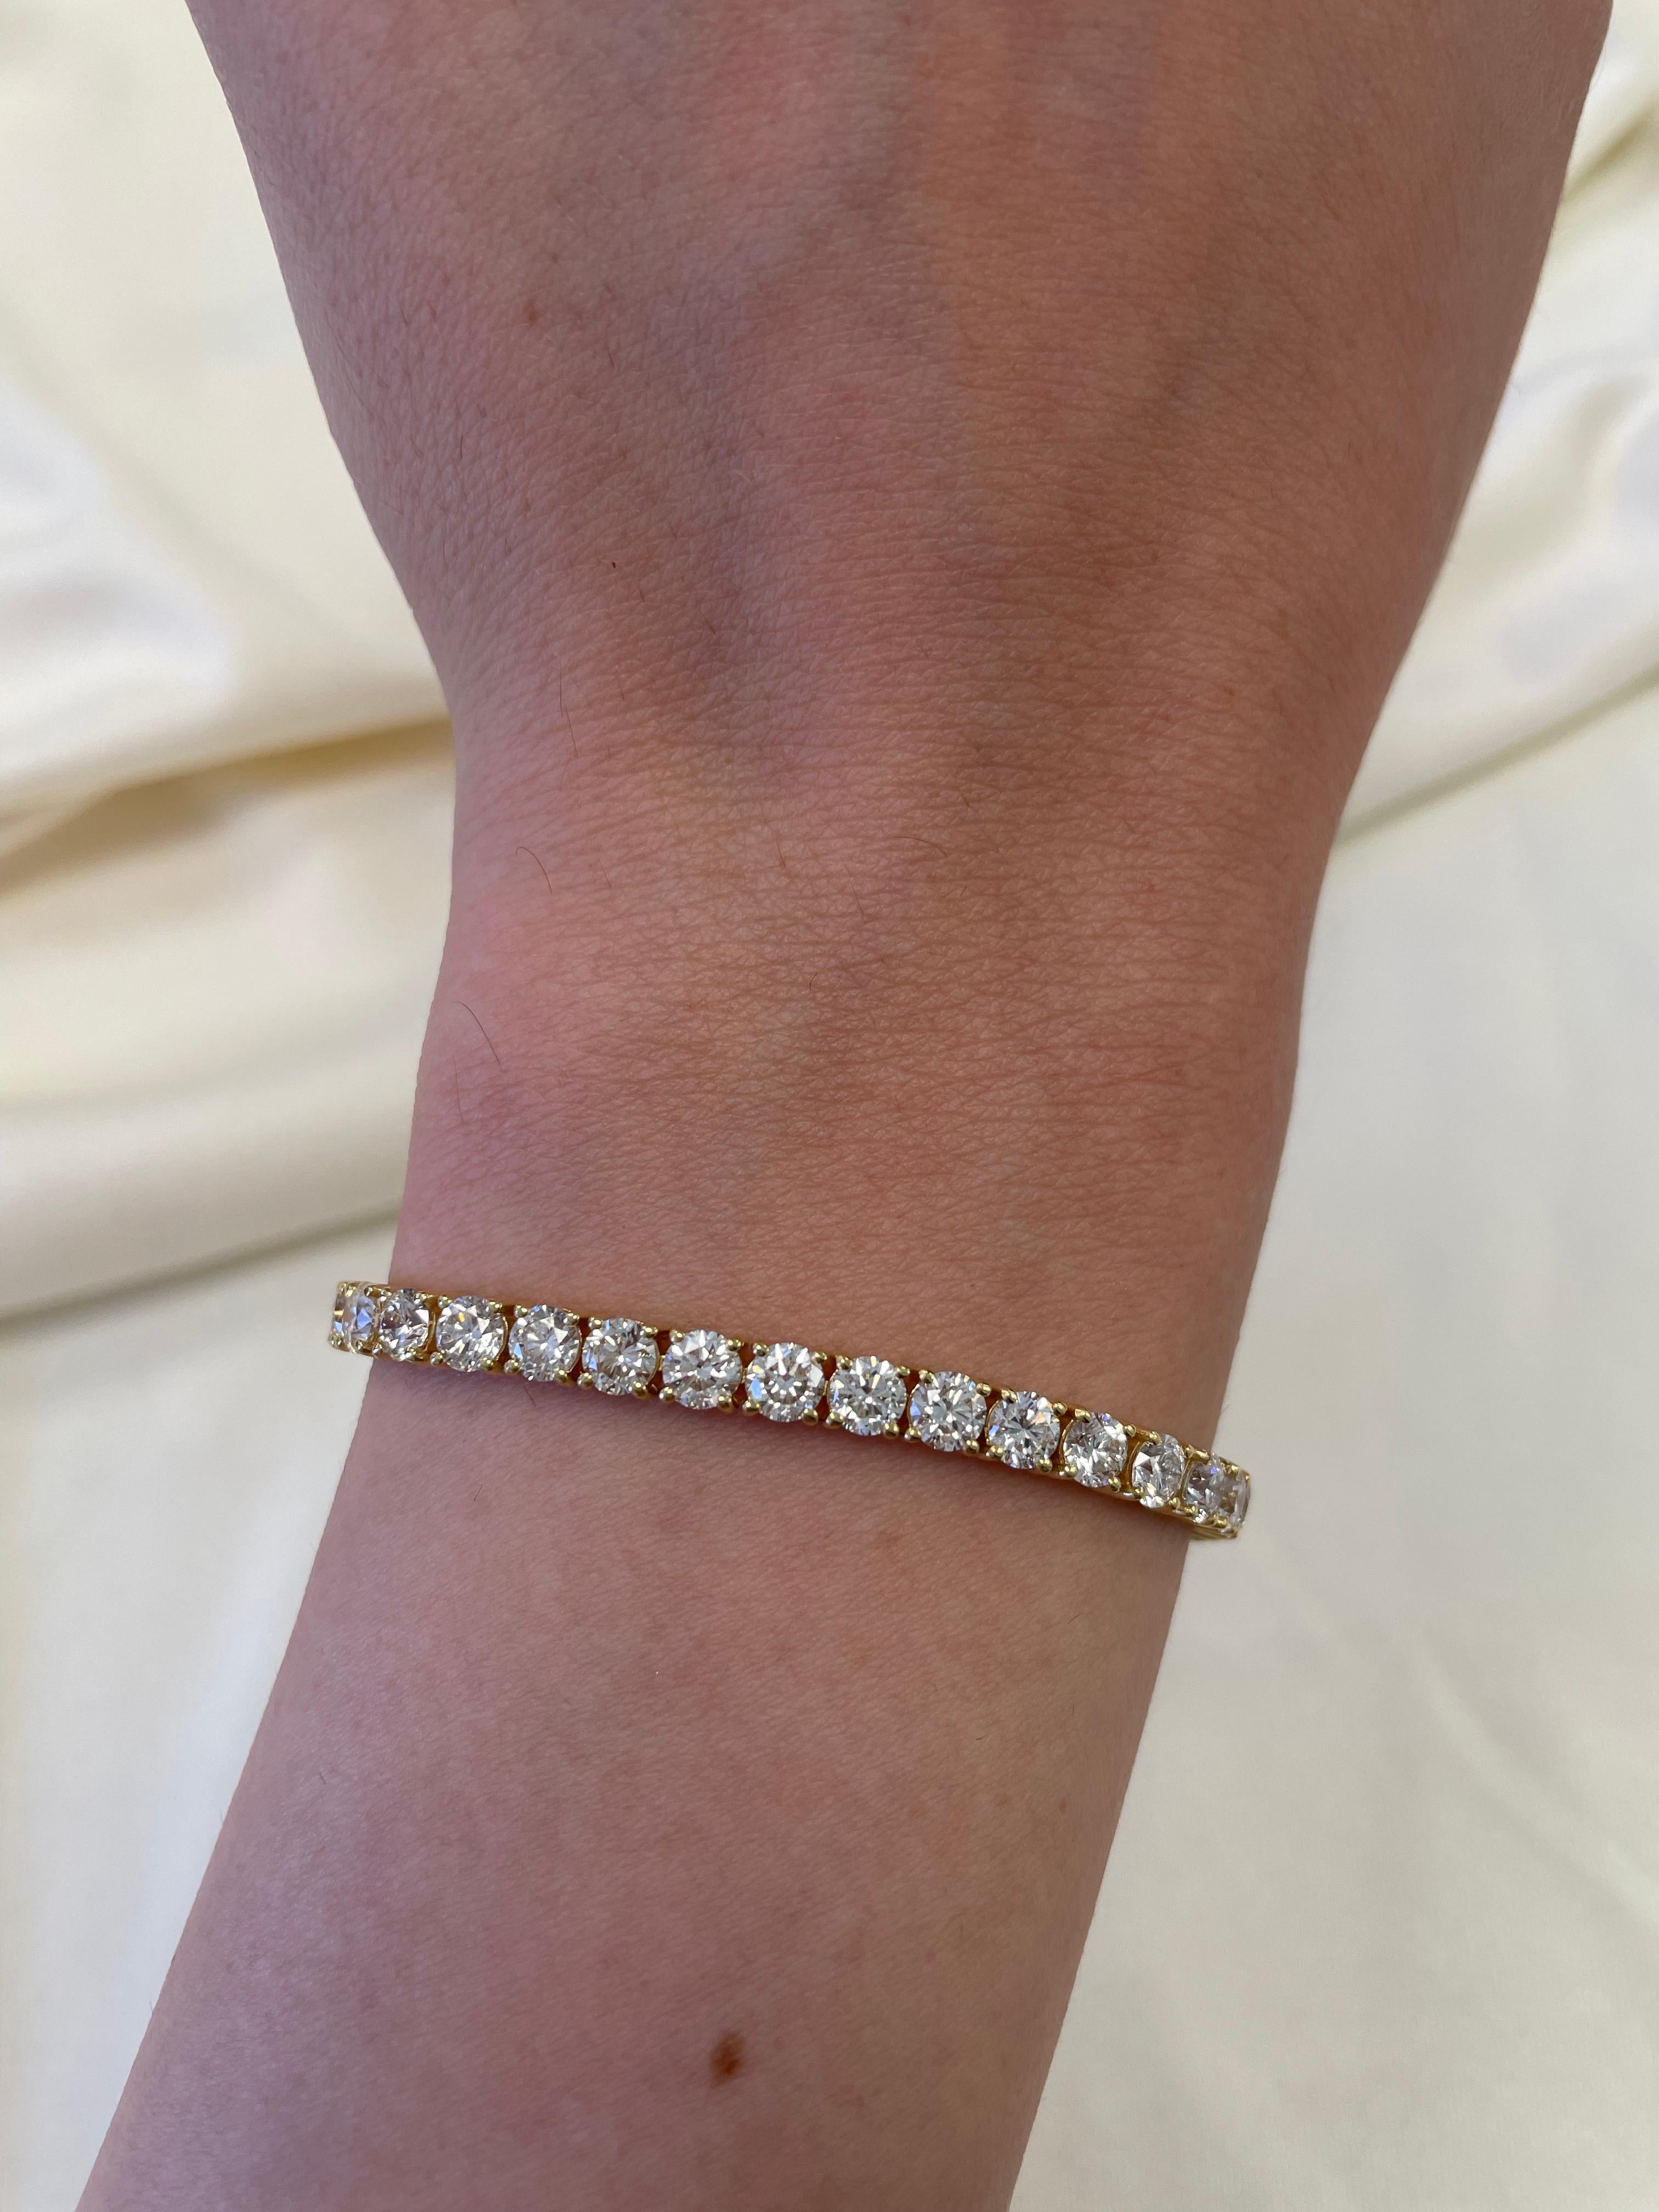 Exquisite and timeless diamonds tennis bracelet, by Alexander Beverly Hills.
42 round brilliant diamonds, 9.97 carats total. Approximately F/G color and VS clarity. Four prong set in 18k yellow gold, 12.48 grams, 7 inches. 
Accommodated with an